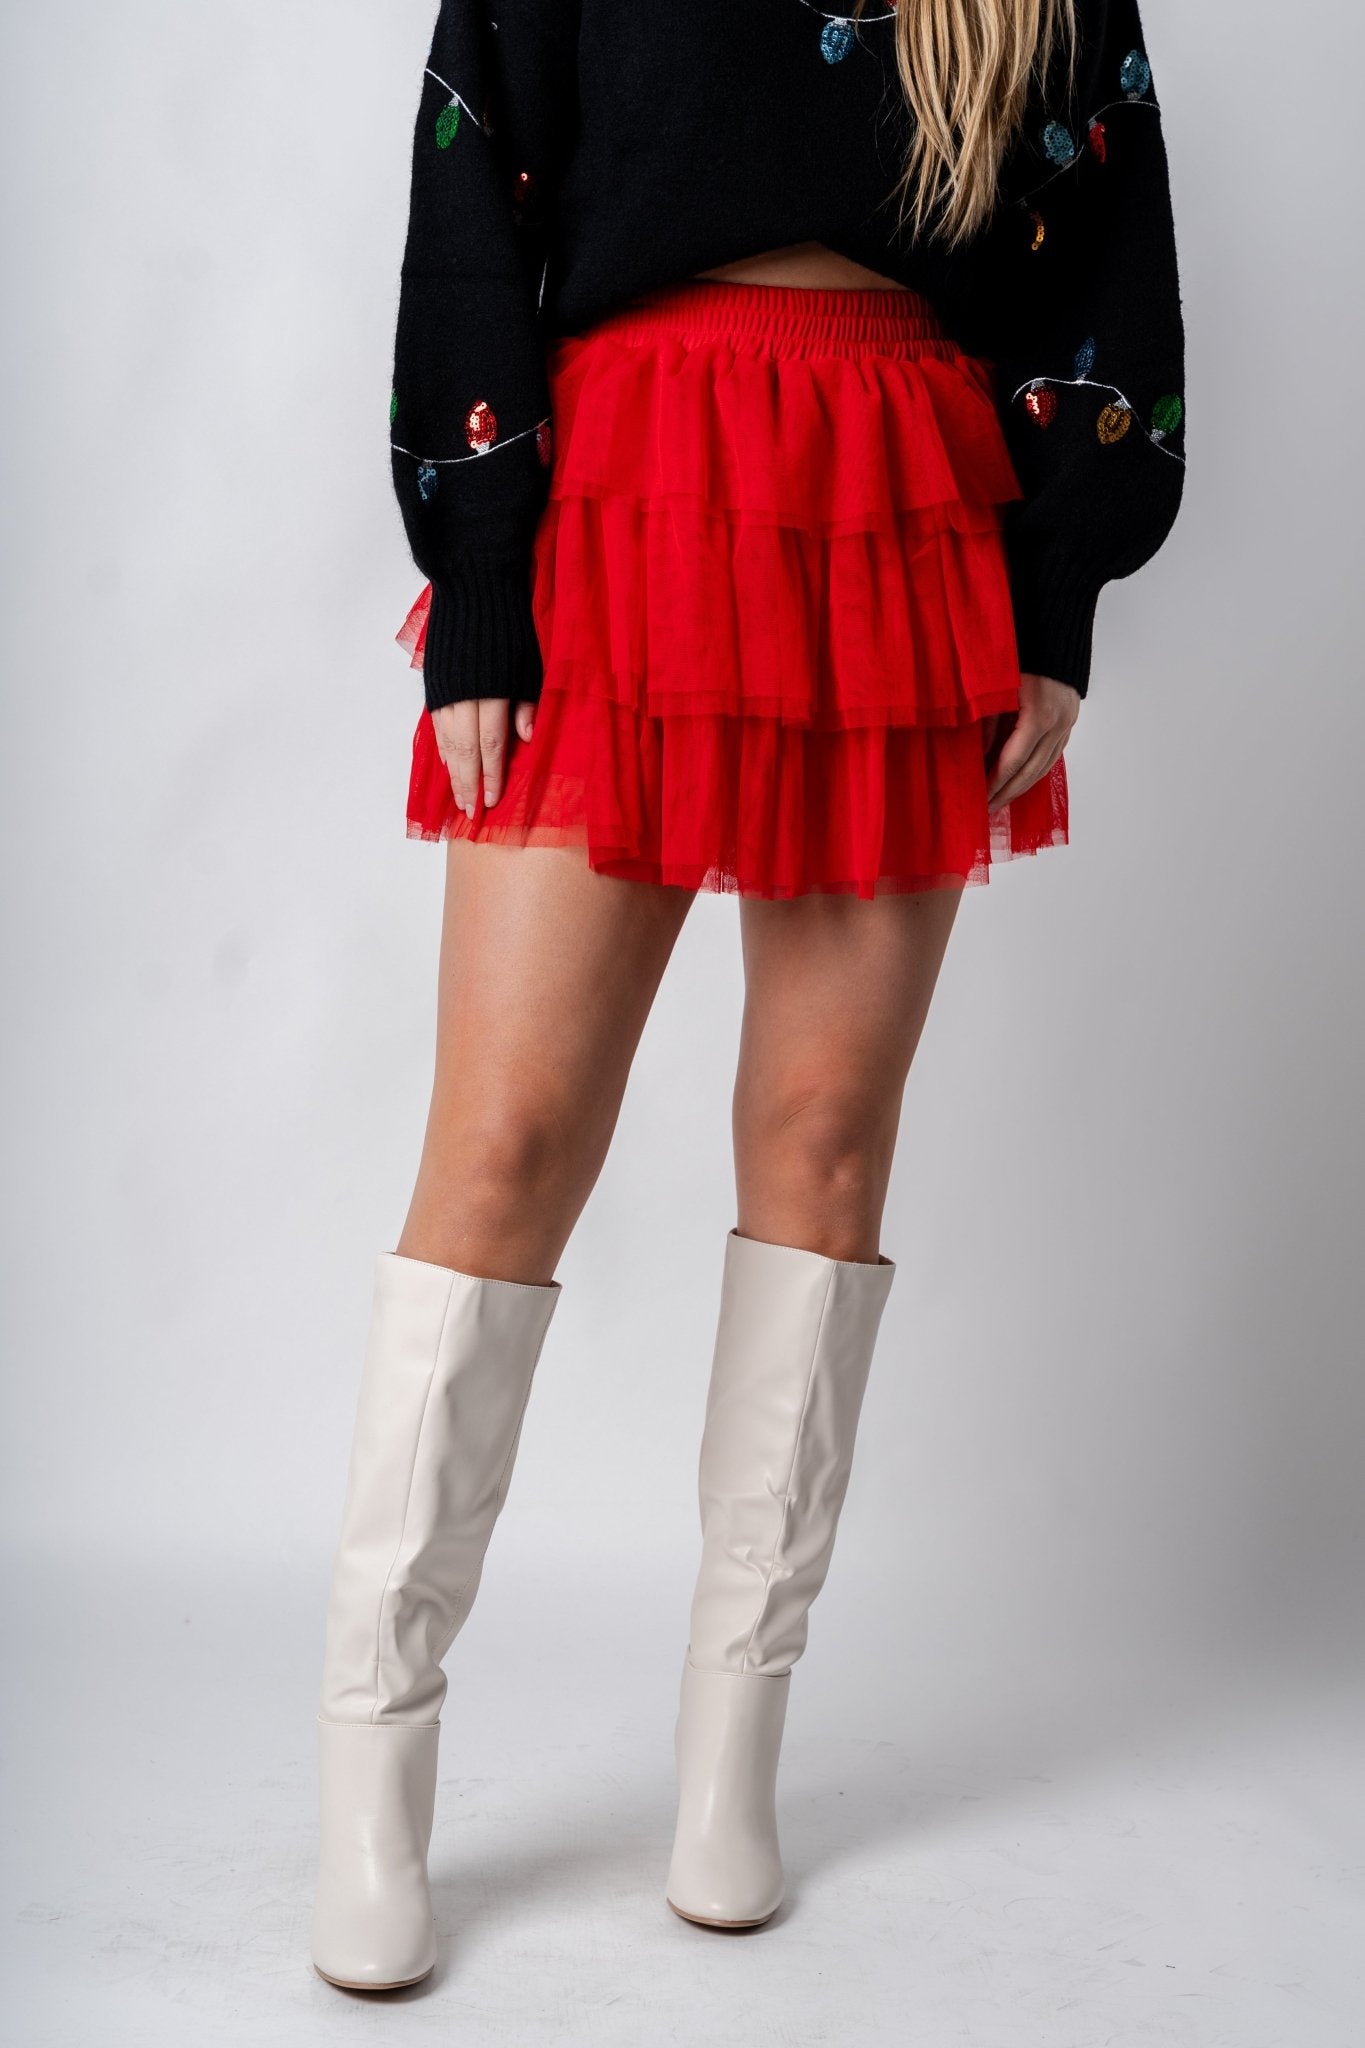 Tiered ruffle mini skirt red | Lush Fashion Lounge: boutique fashion skirts, affordable boutique skirts, cute affordable skirts